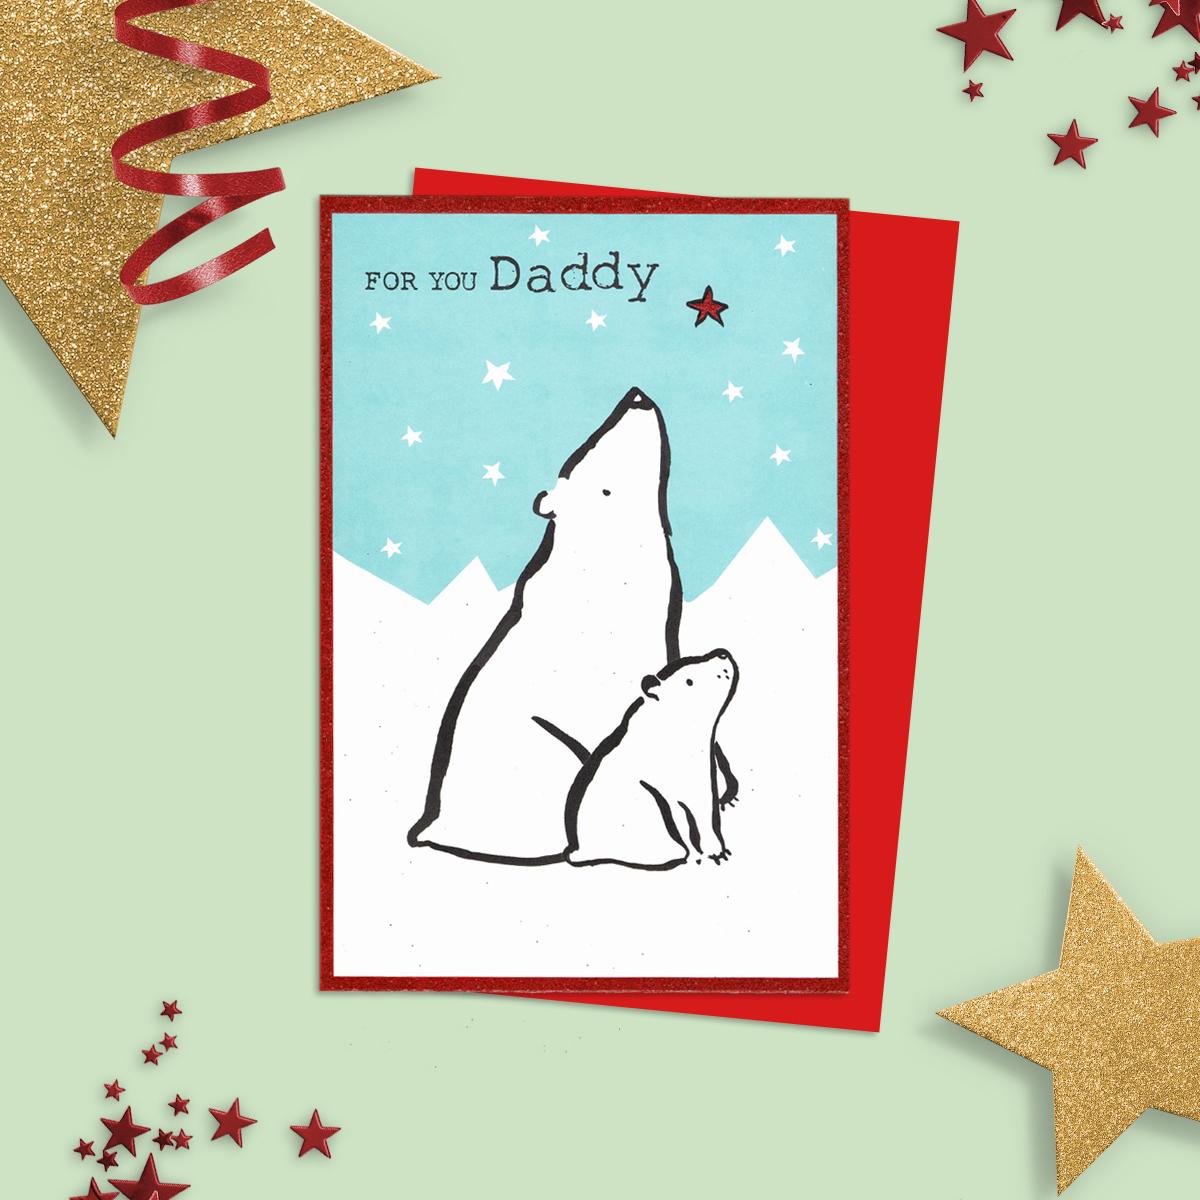 For You Daddy Featuring A Doodle Drawn Daddy Polar Bear And Cub. Finished With Red Glitter And Red Envelope